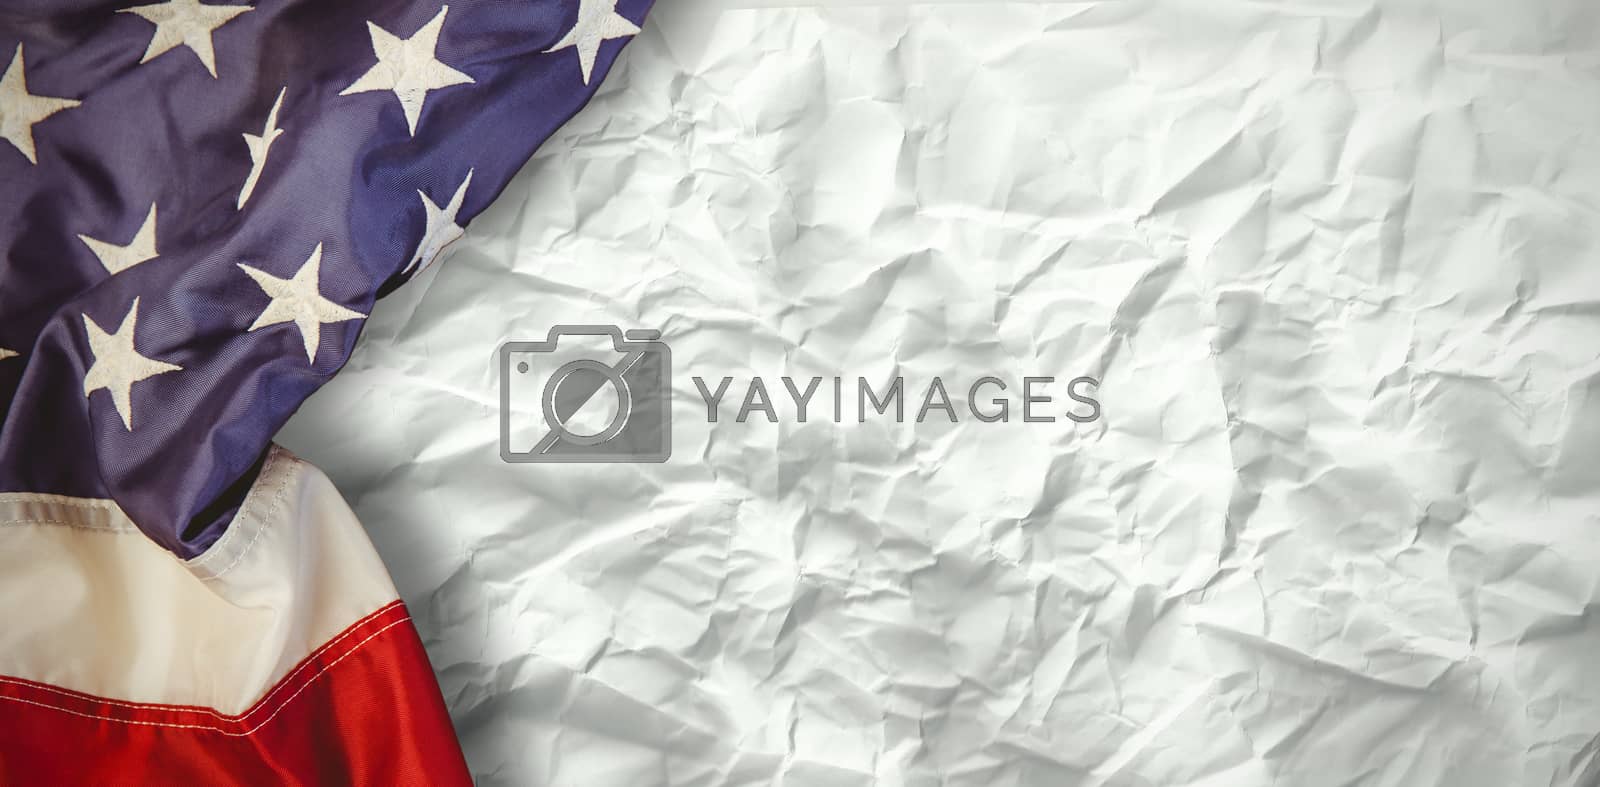 Royalty free image of Composite image of creased us flag by Wavebreakmedia